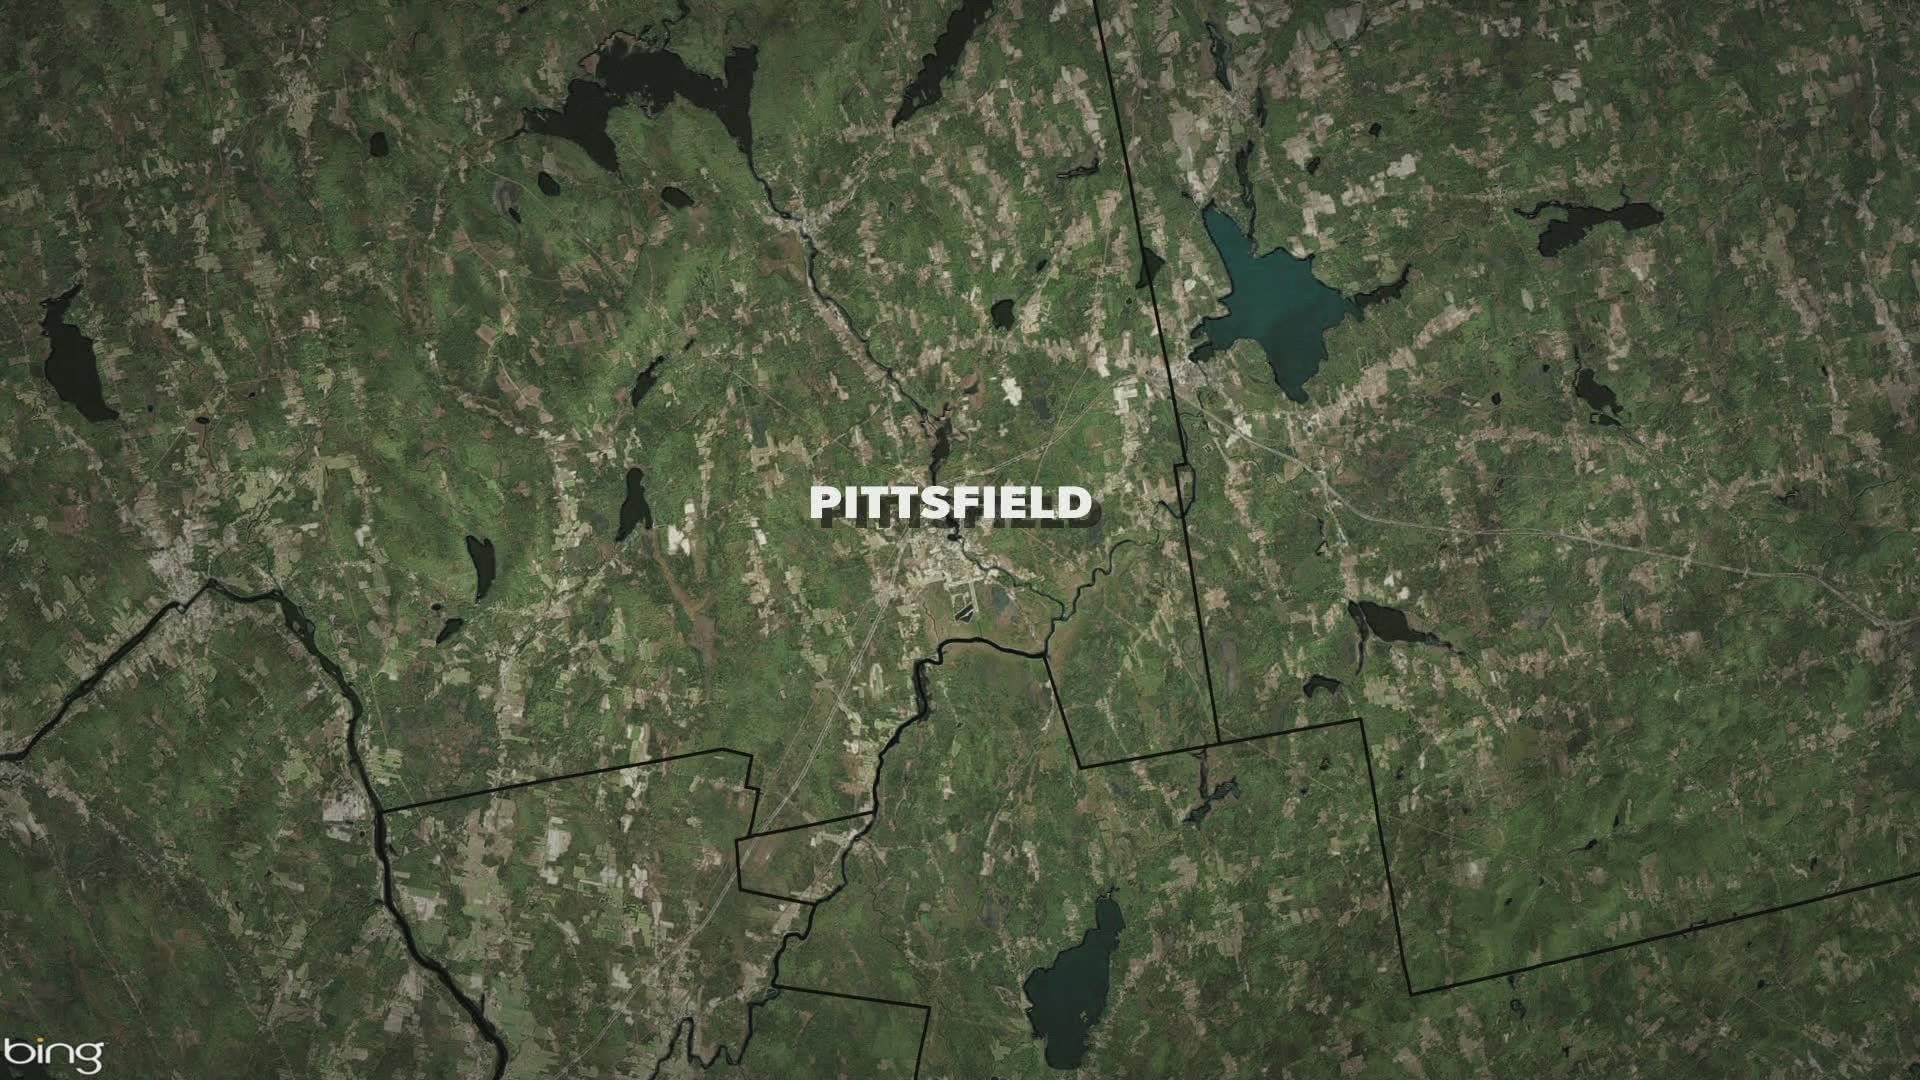 The calls forced the evacuation of Puritan Medical Products in Pittsfield Thursday.